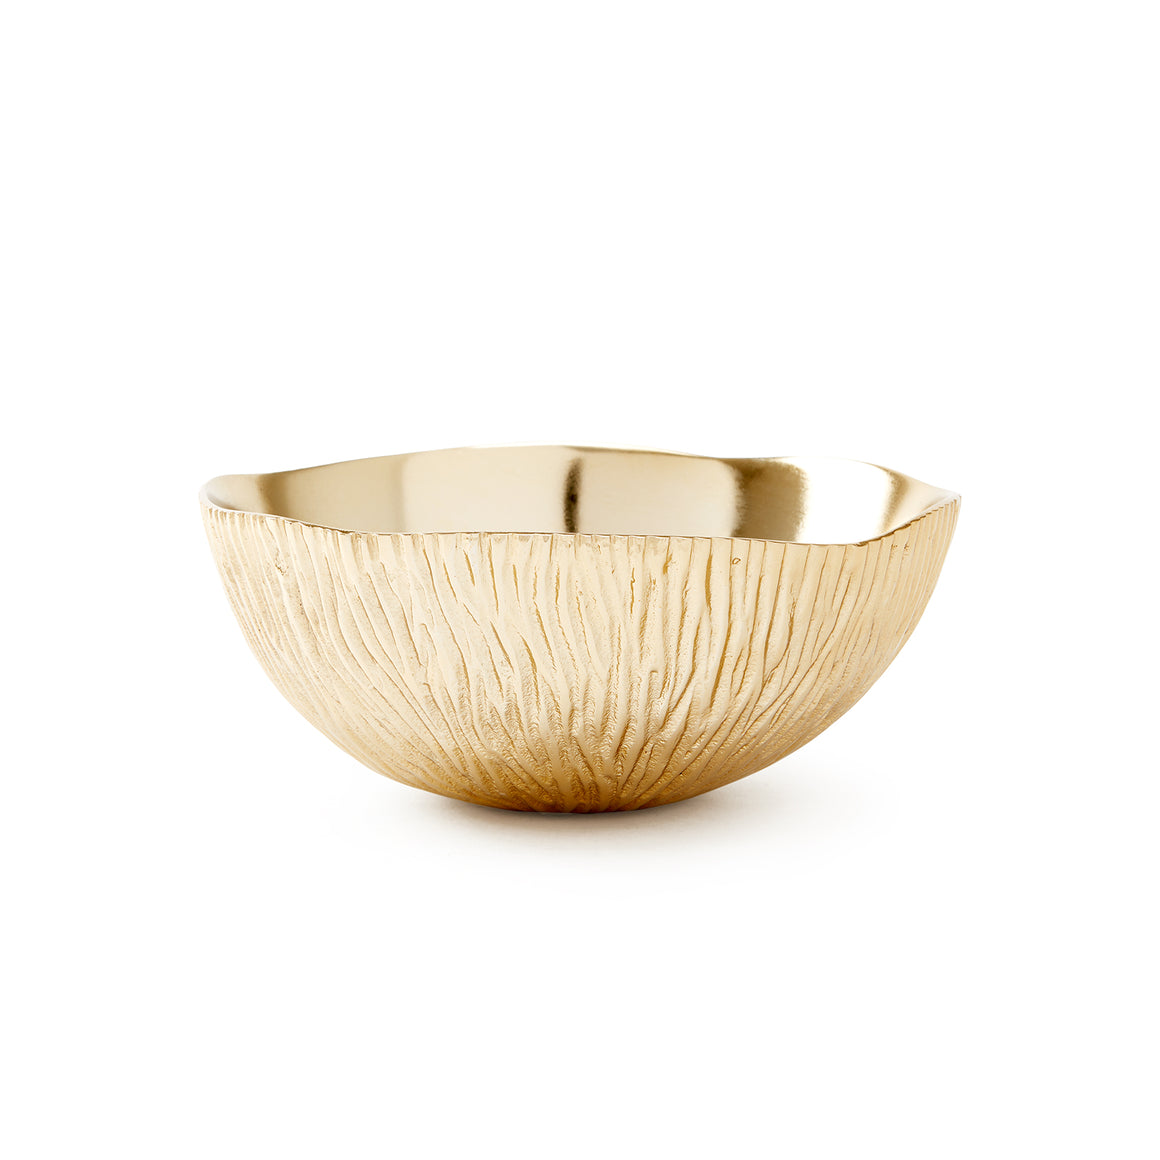 Medium Bowl in Brass Finish | Coral Collection | Villa & House